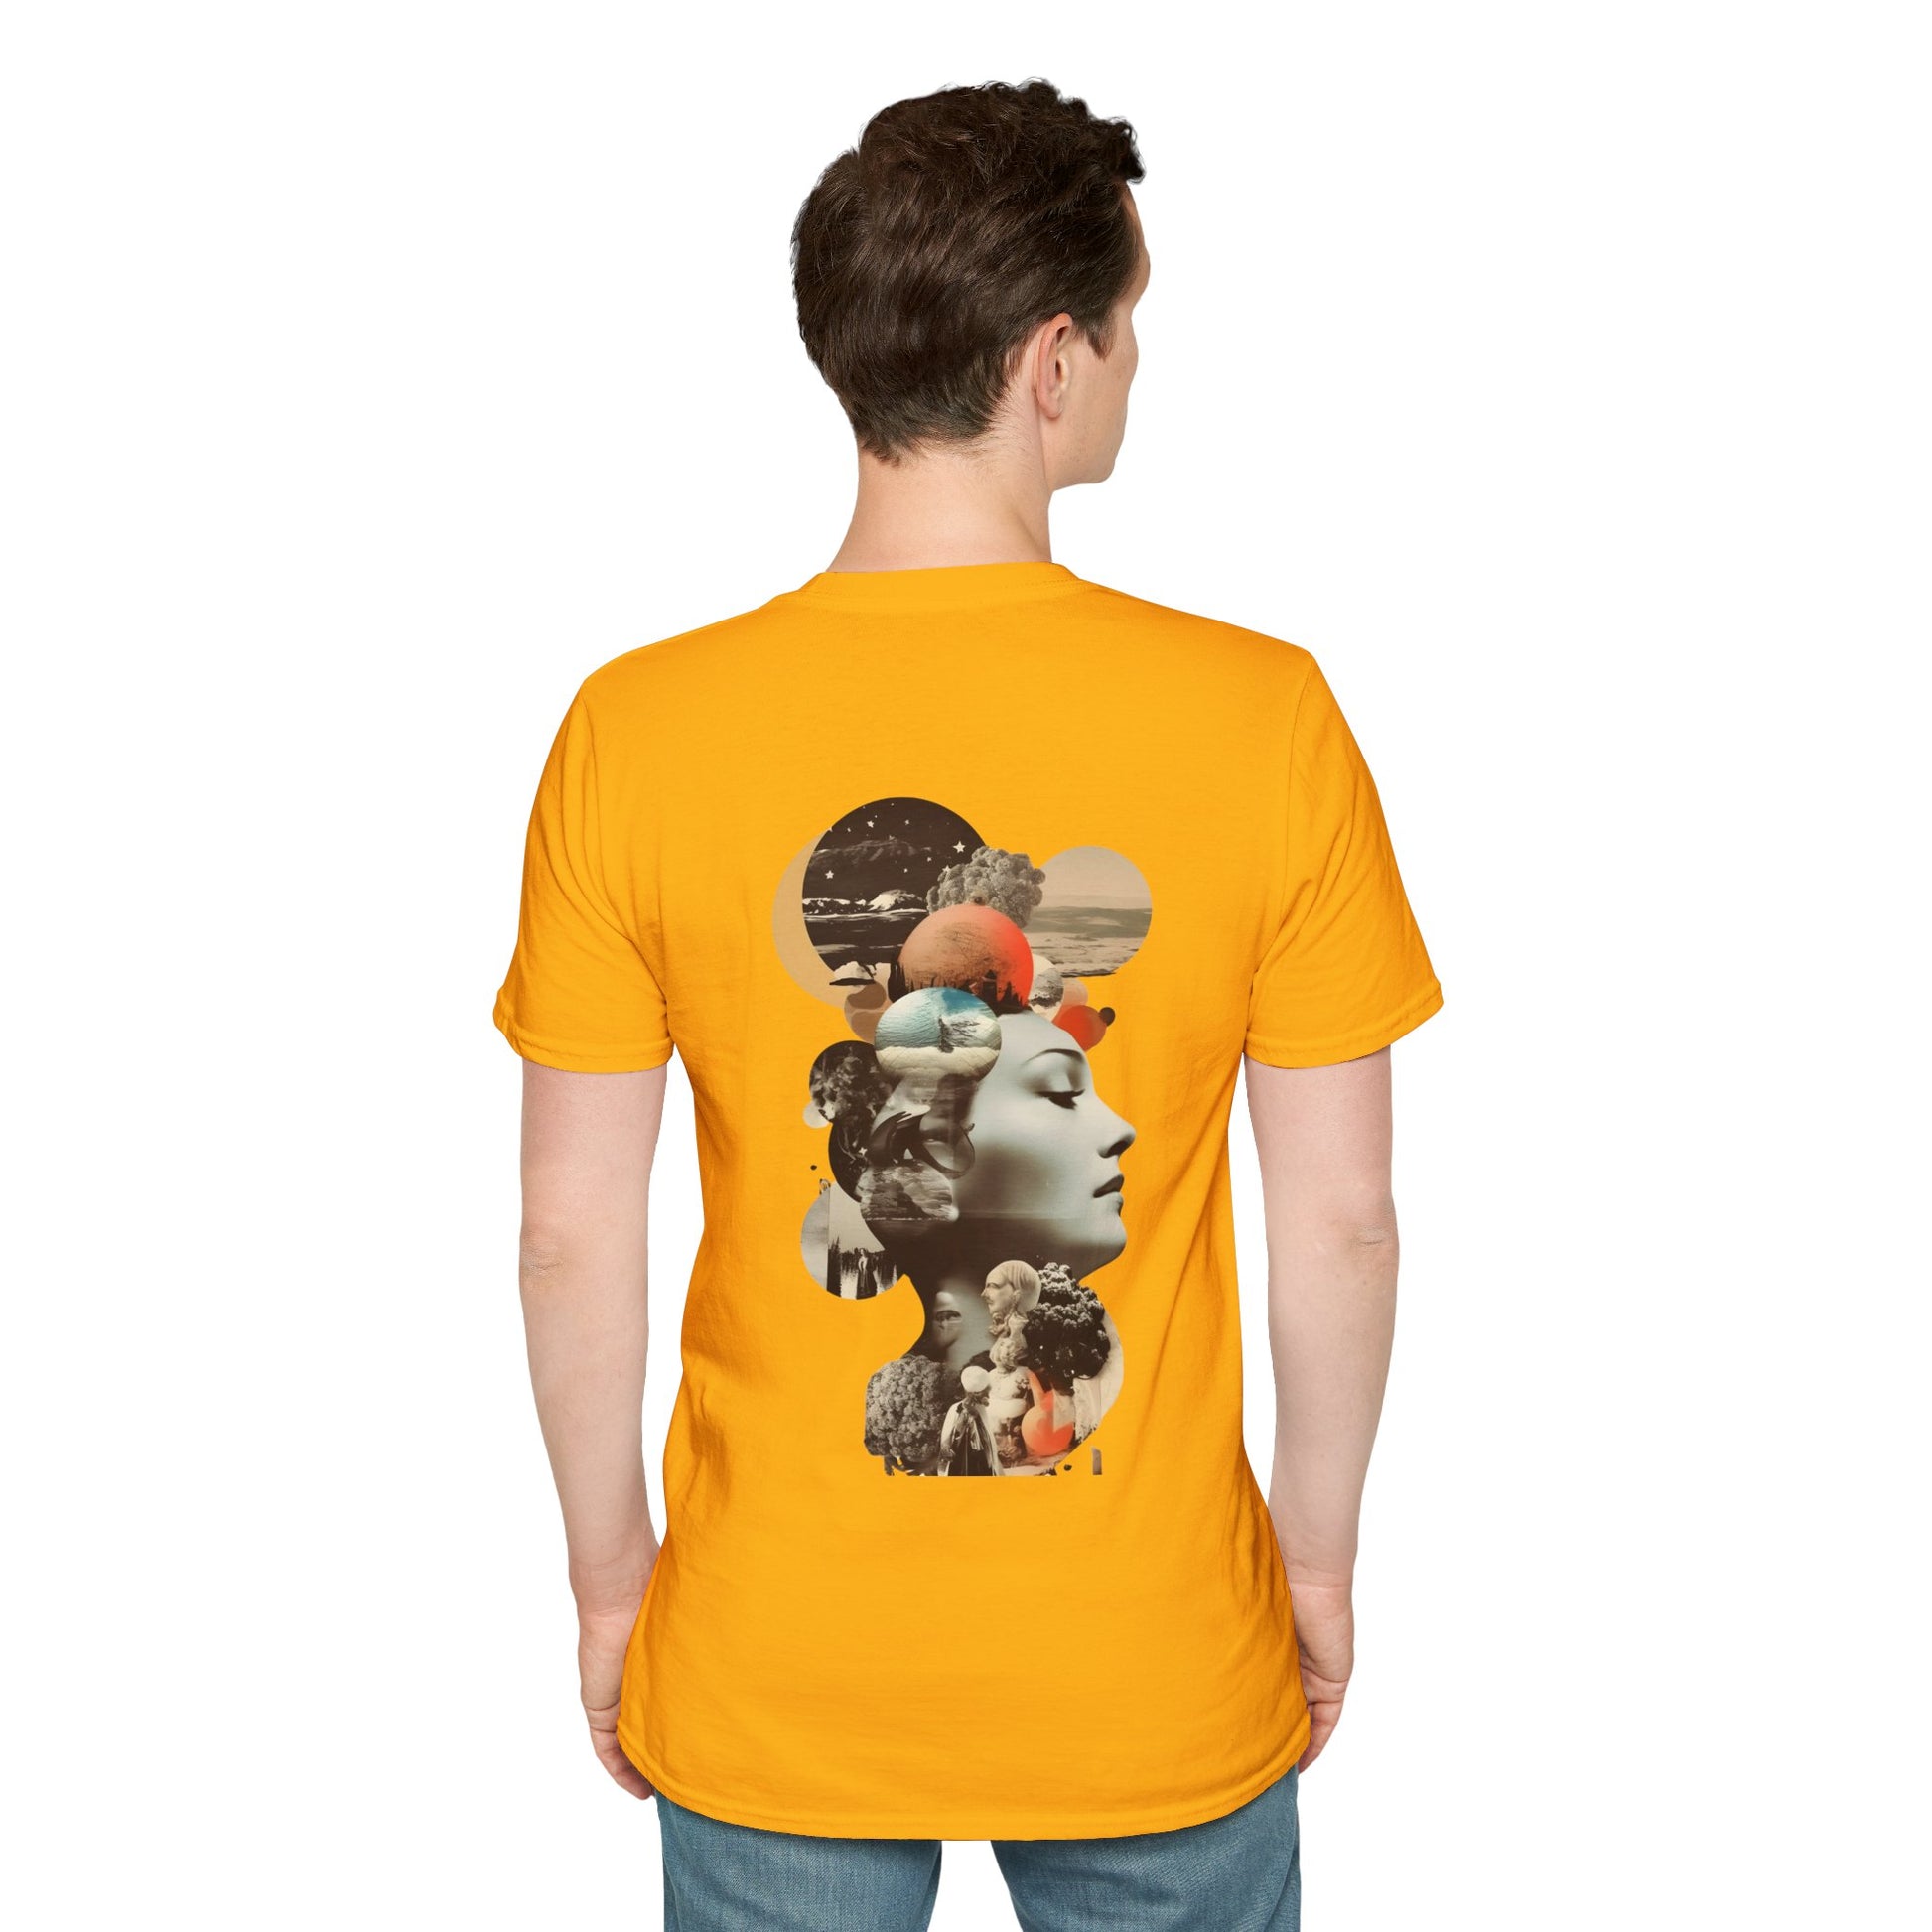 Yellow T-shirt with a collage of a mysterious figure surrounded by butterflies and roses